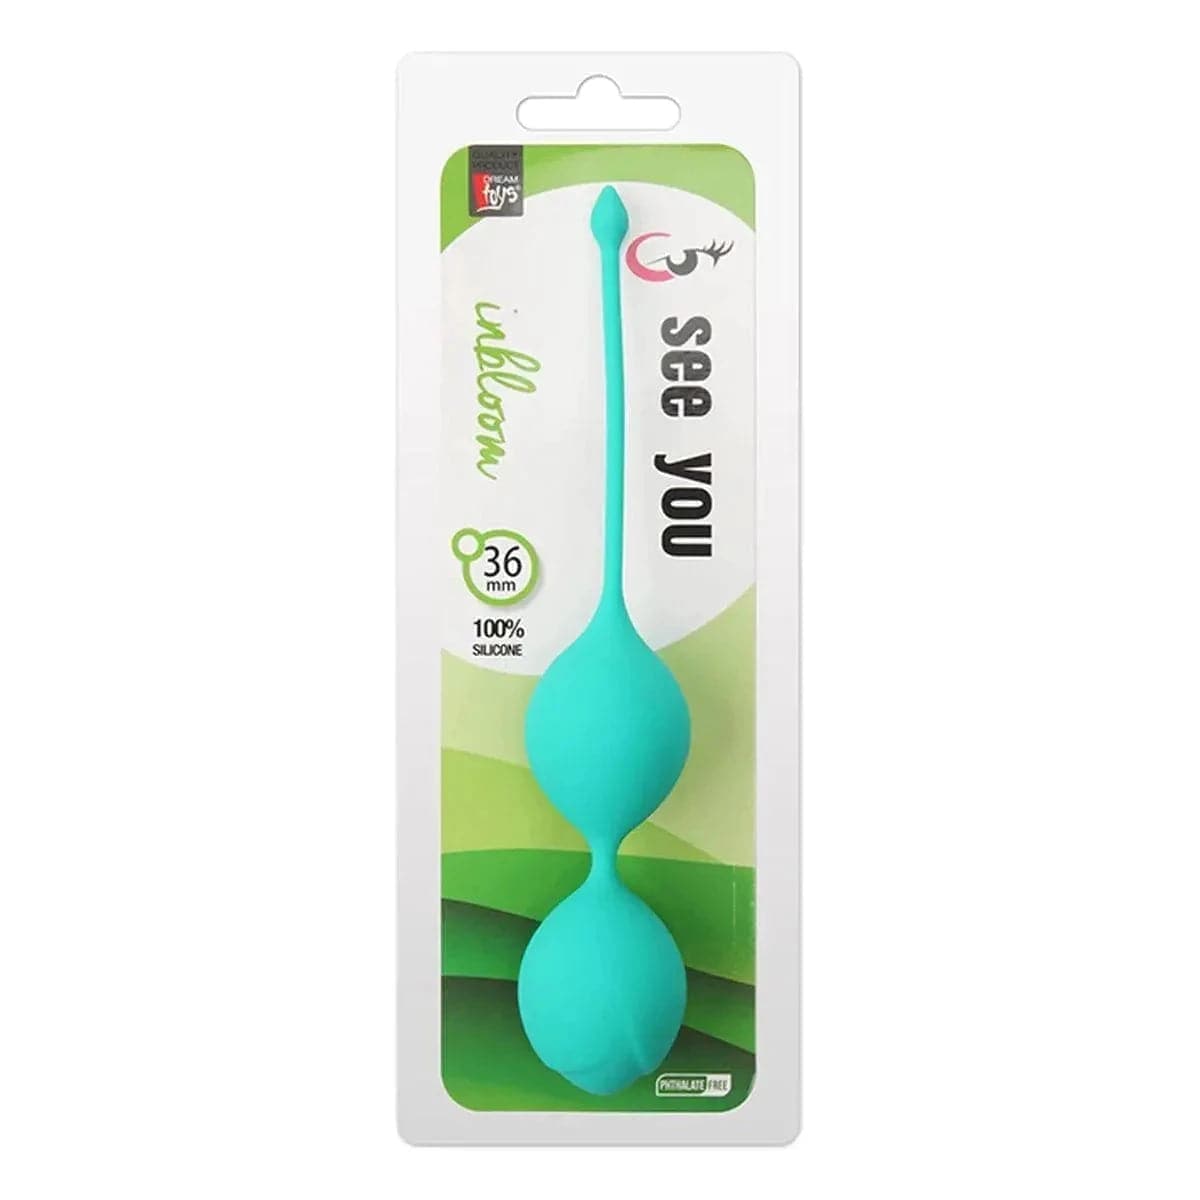 Bolas Vaginais See You Bloom 100% Silicone 3.6cm Verde, 90gr  See You   